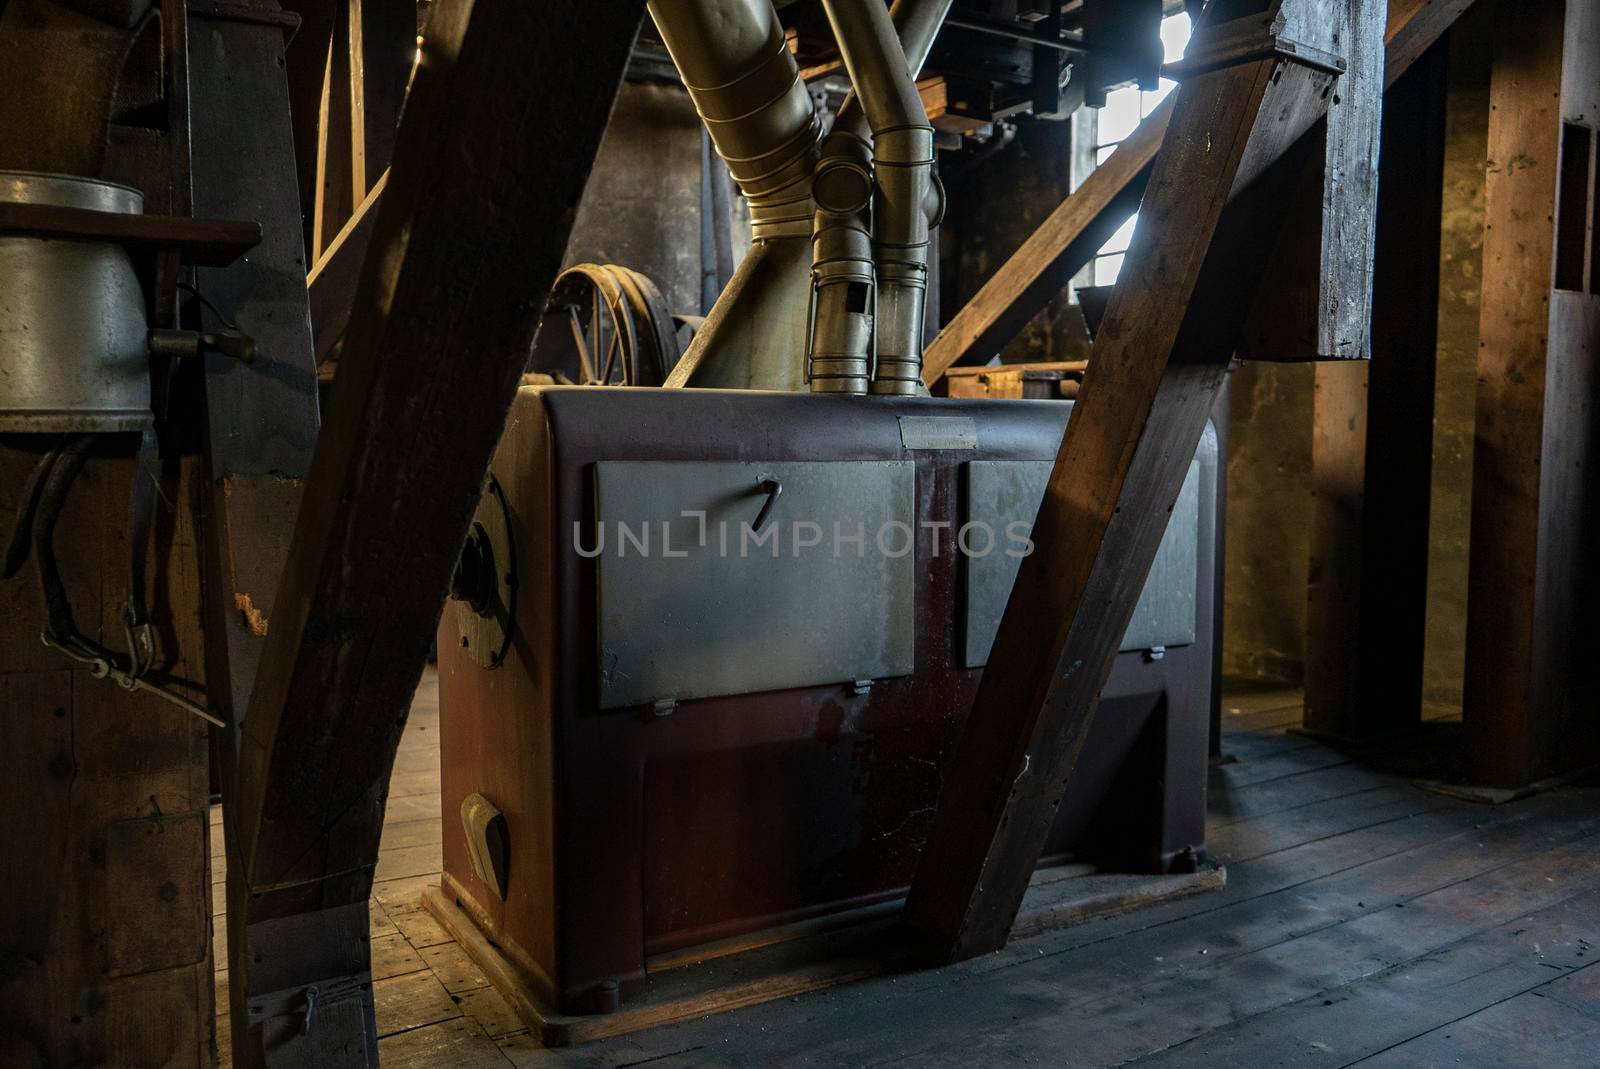 Interior shot of an old historic factory with machinery